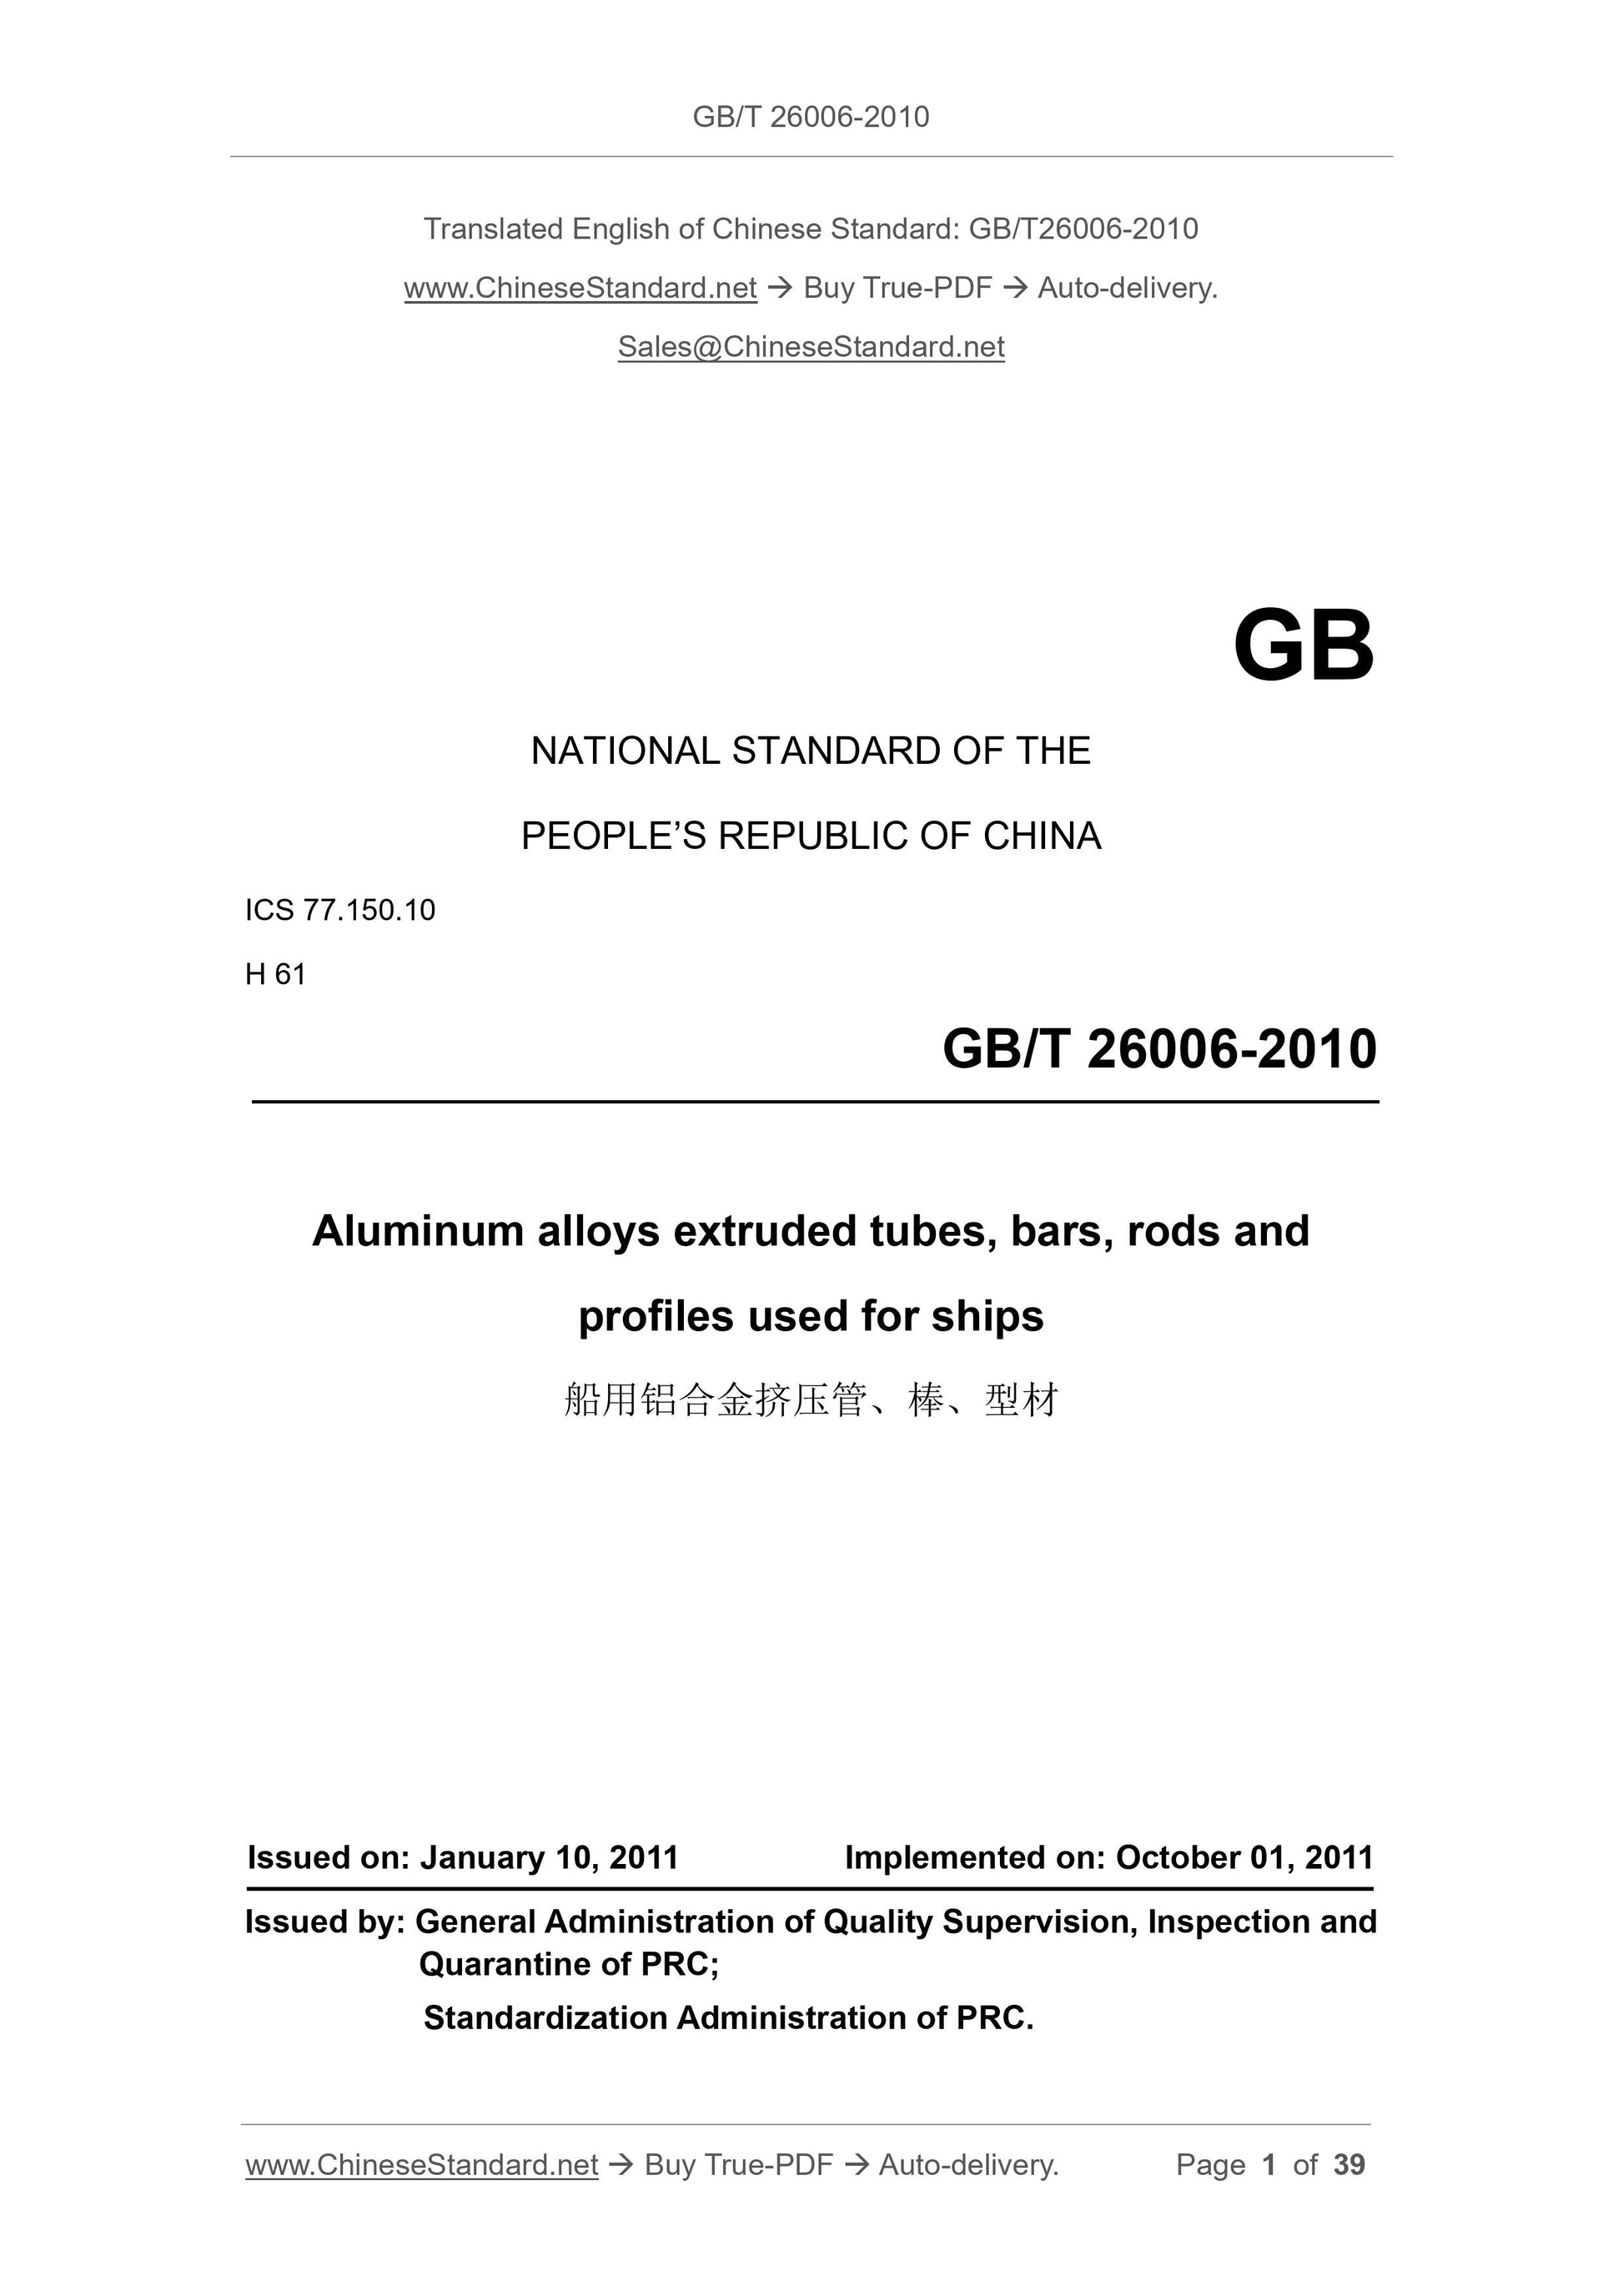 GB/T 26006-2010 Page 1